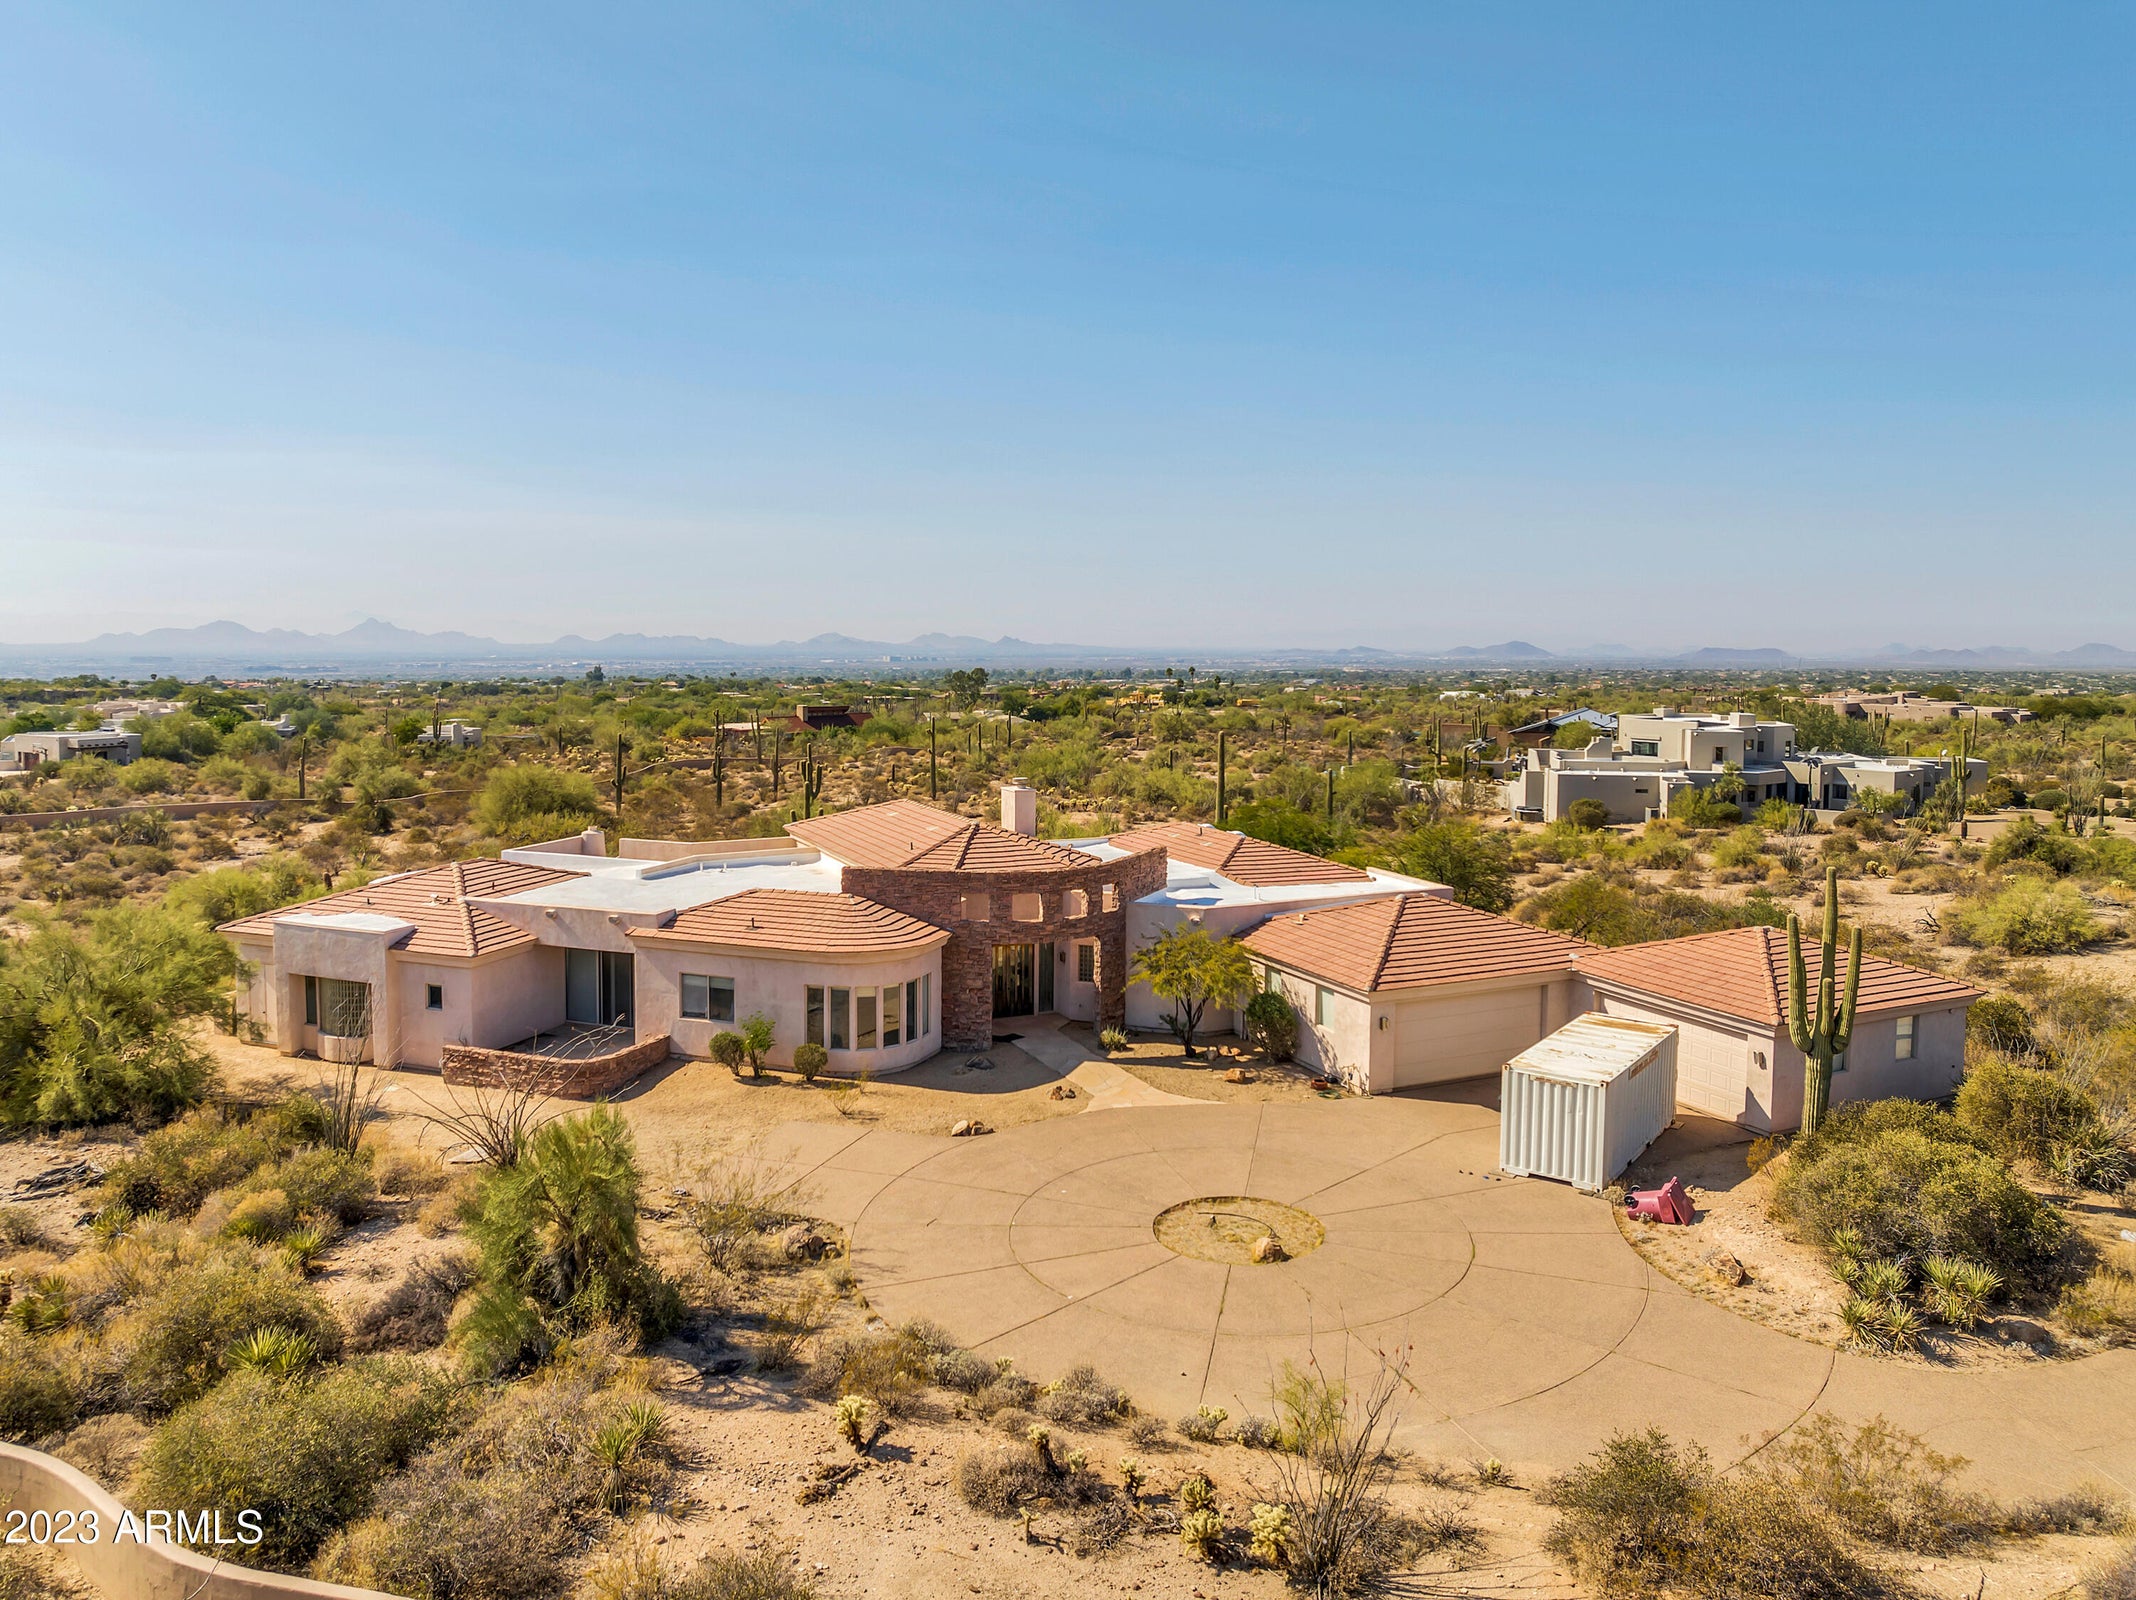 HomeSmart Agents Score Big for Clients in Scottsdale : Rare Investment Opportunity